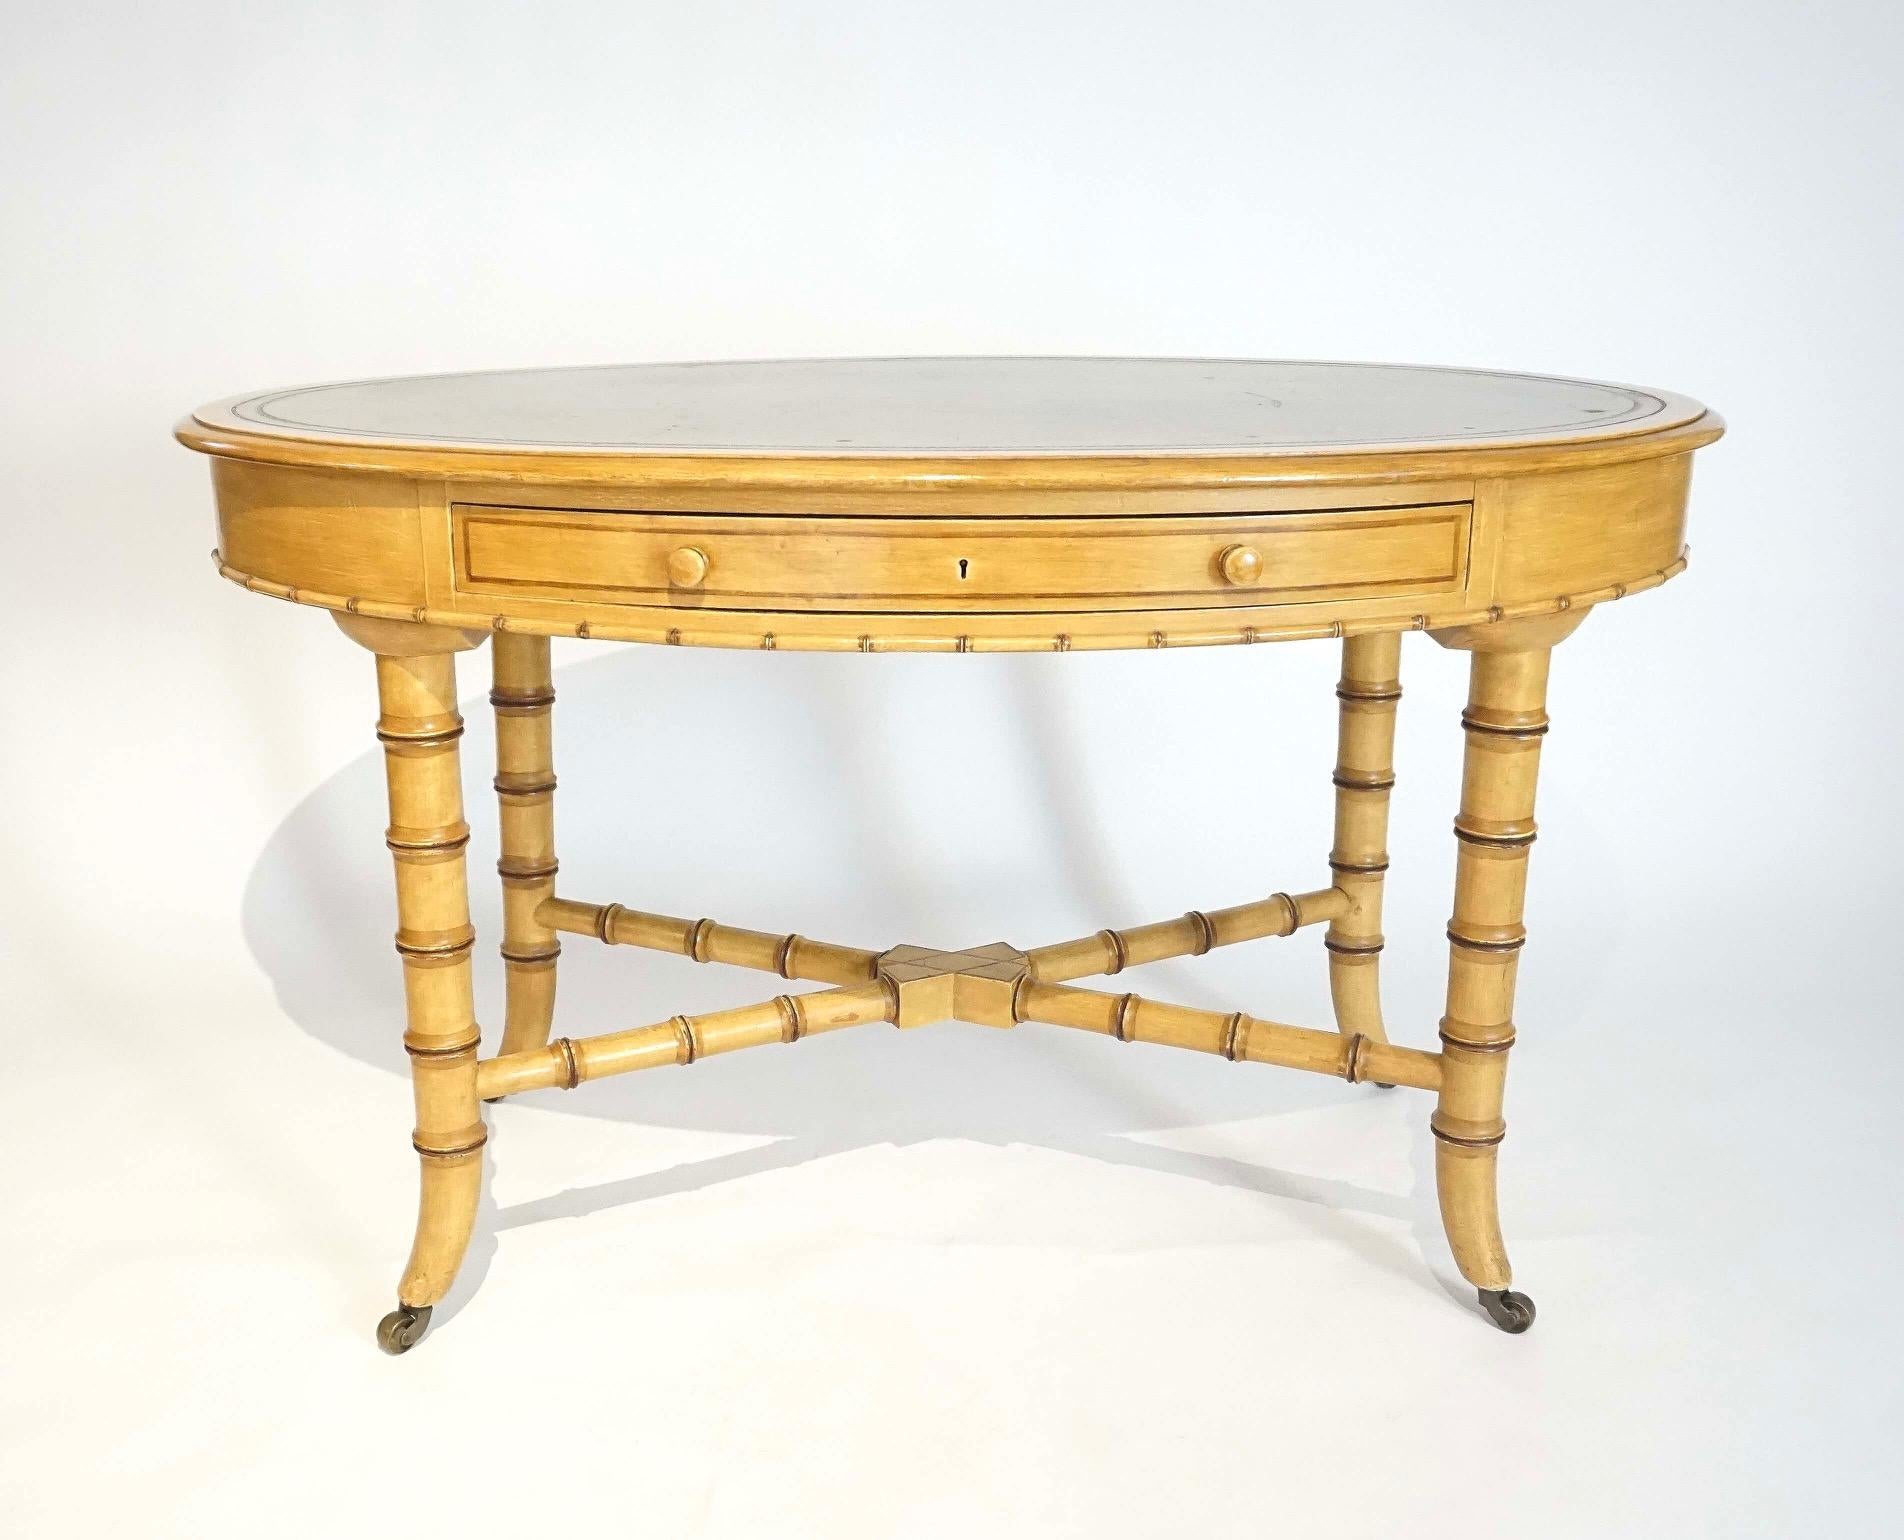 English circa 1875 Aesthetic Movement writing table or desk by London cabinetmakers Howard & Sons having original green leather top; the oval form case with single drawer and original faux bamboo painted finish on turned segmented x-form stretcher